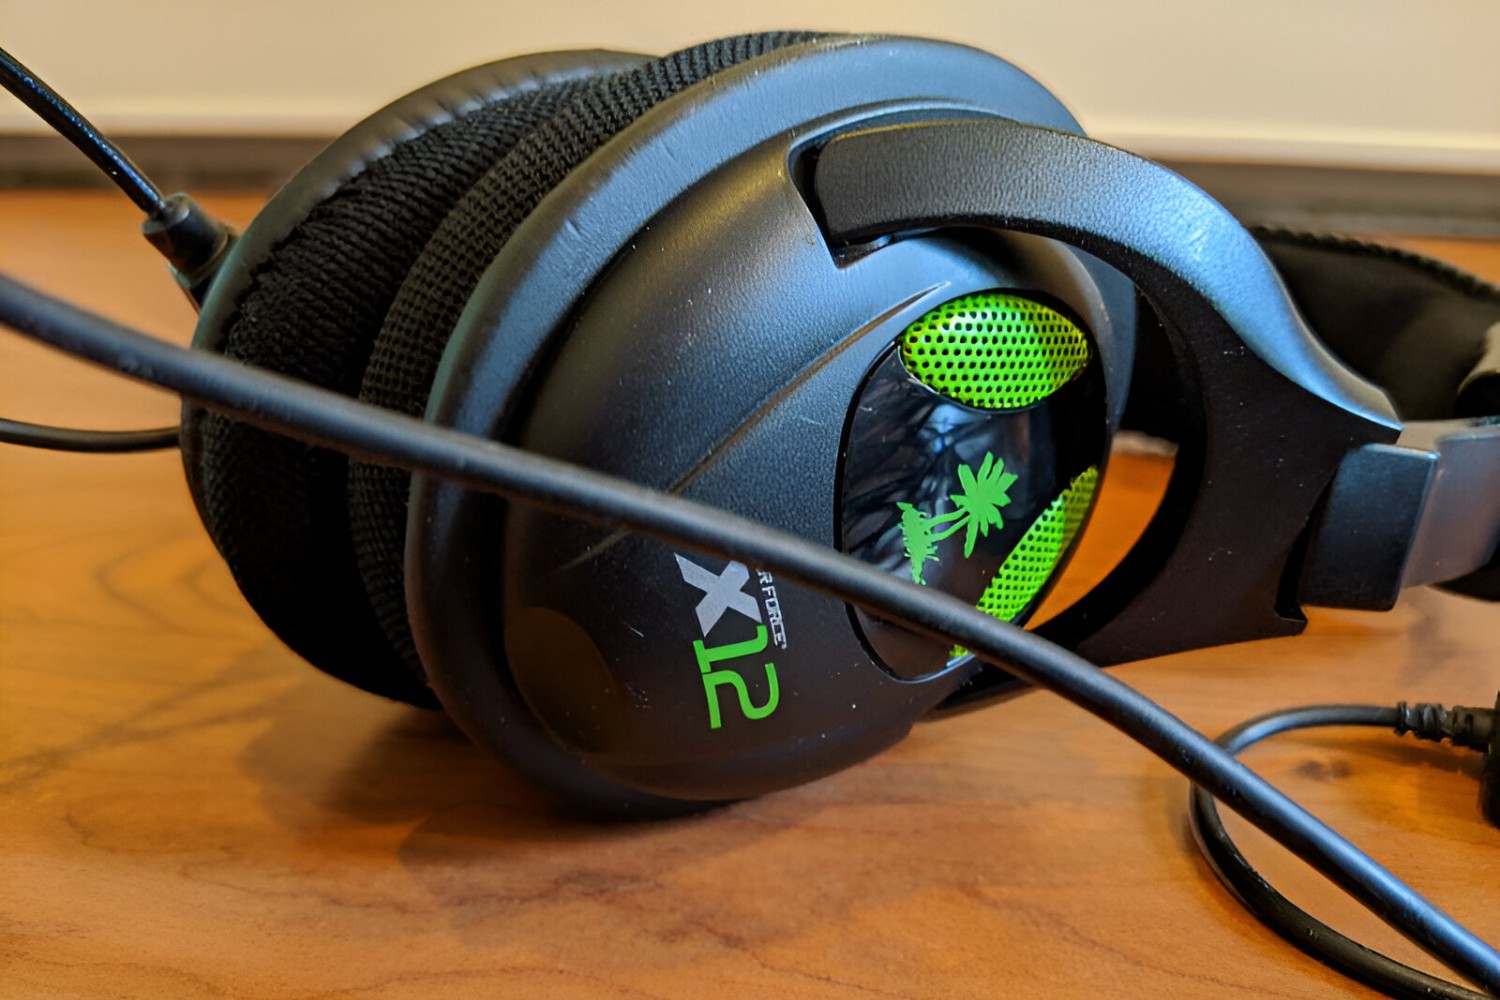 How To Set Up Turtle Beach X12 Gaming Headset To Record Audio On PC